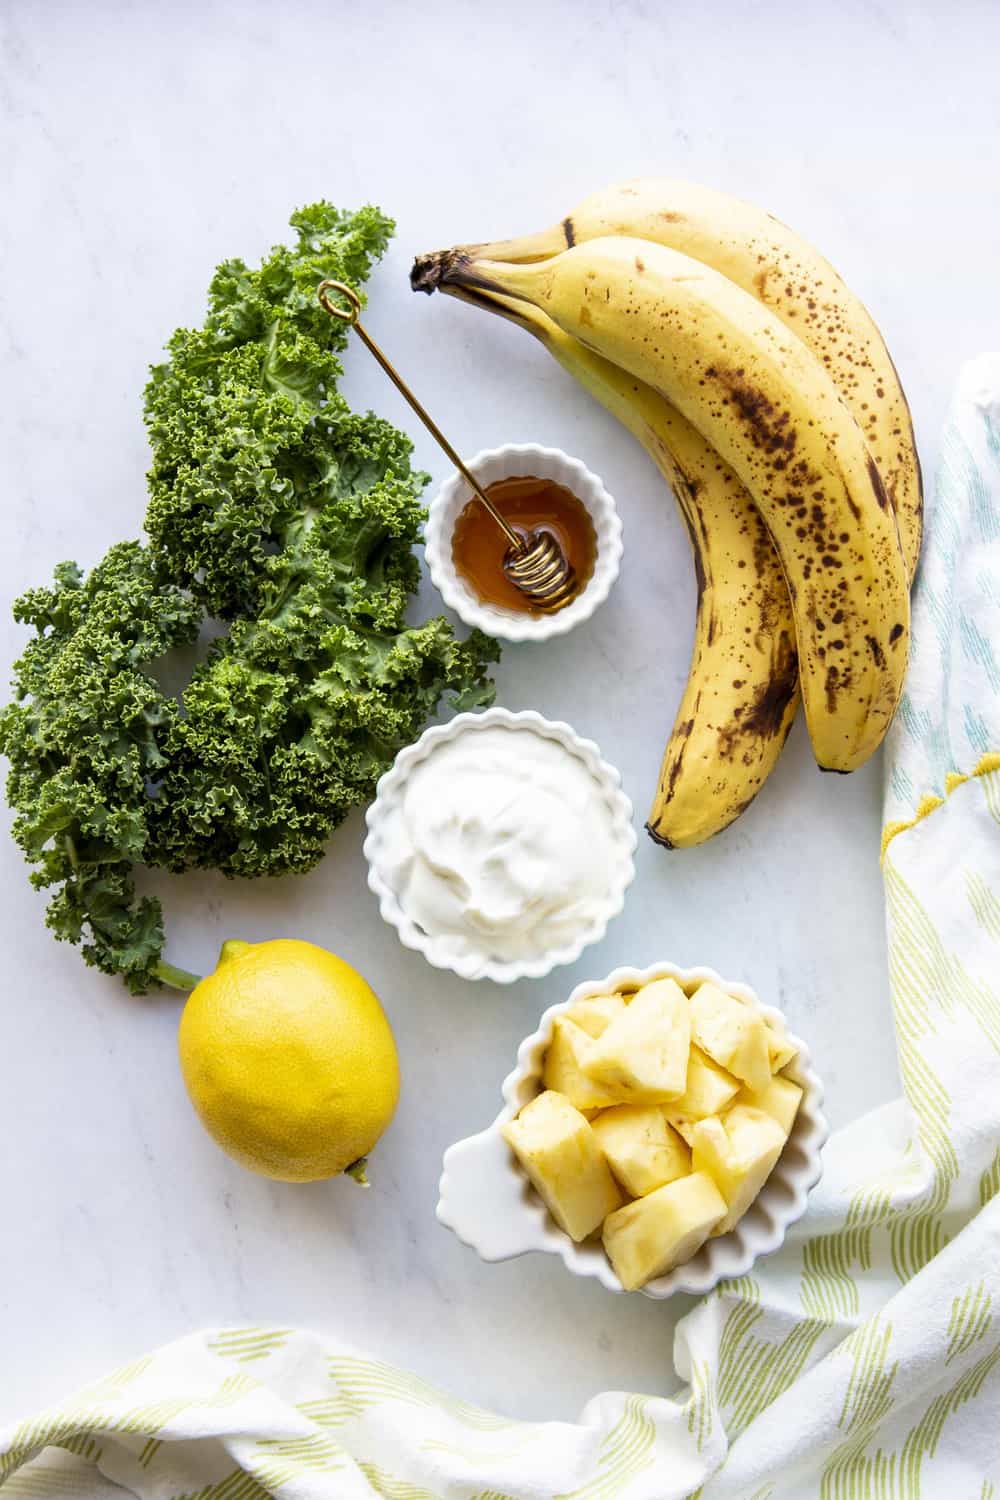 Kale smoothie ingredients on a marble board next to a kitchen towel